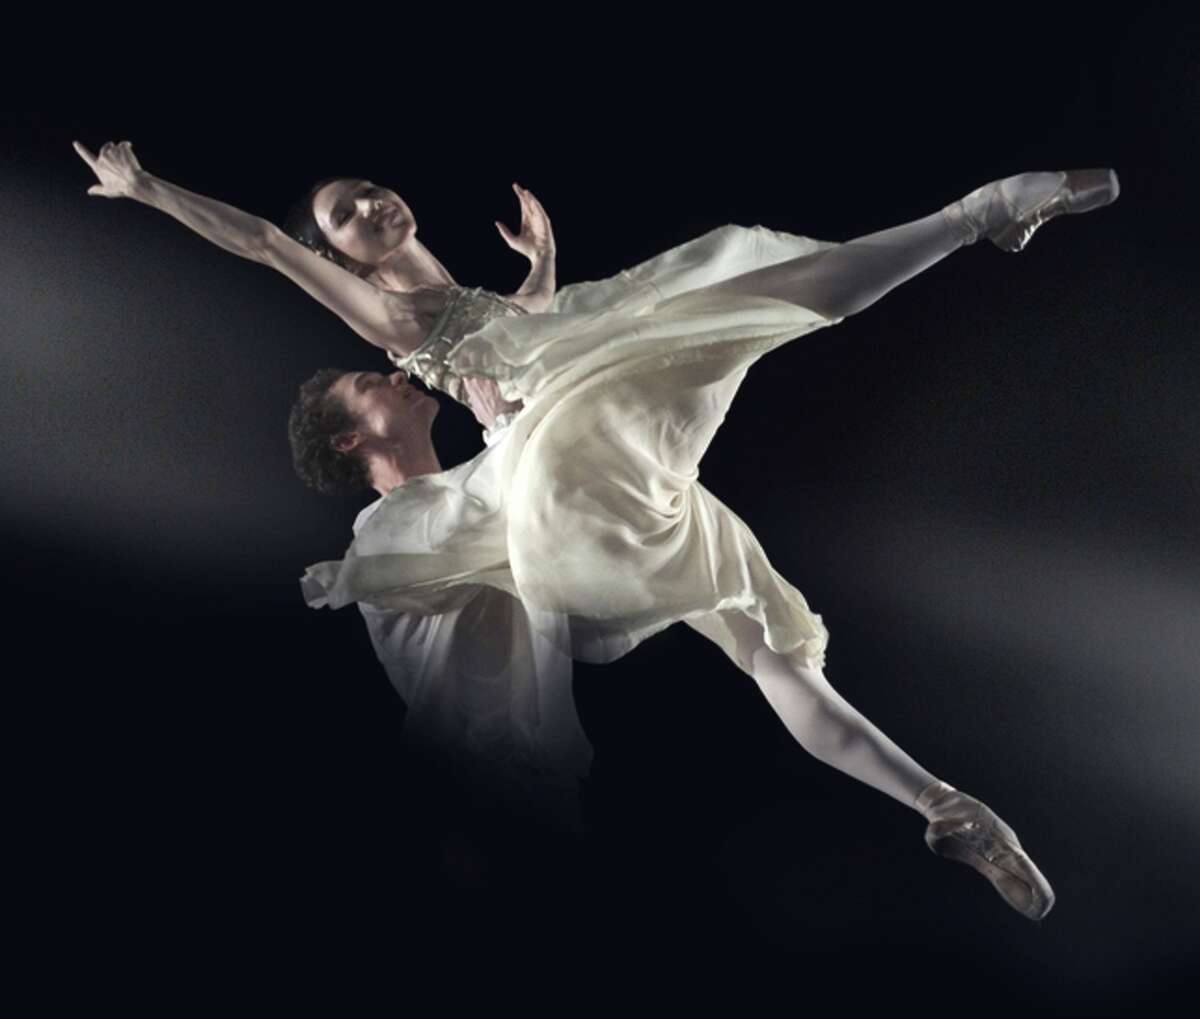 American Ballet Theatre dancers Hee Seo and Cory Stearns perform Kenneth MacMillan’s “Romeo and Juliet” in the “American Masters” documentary on the company’s 75 years.